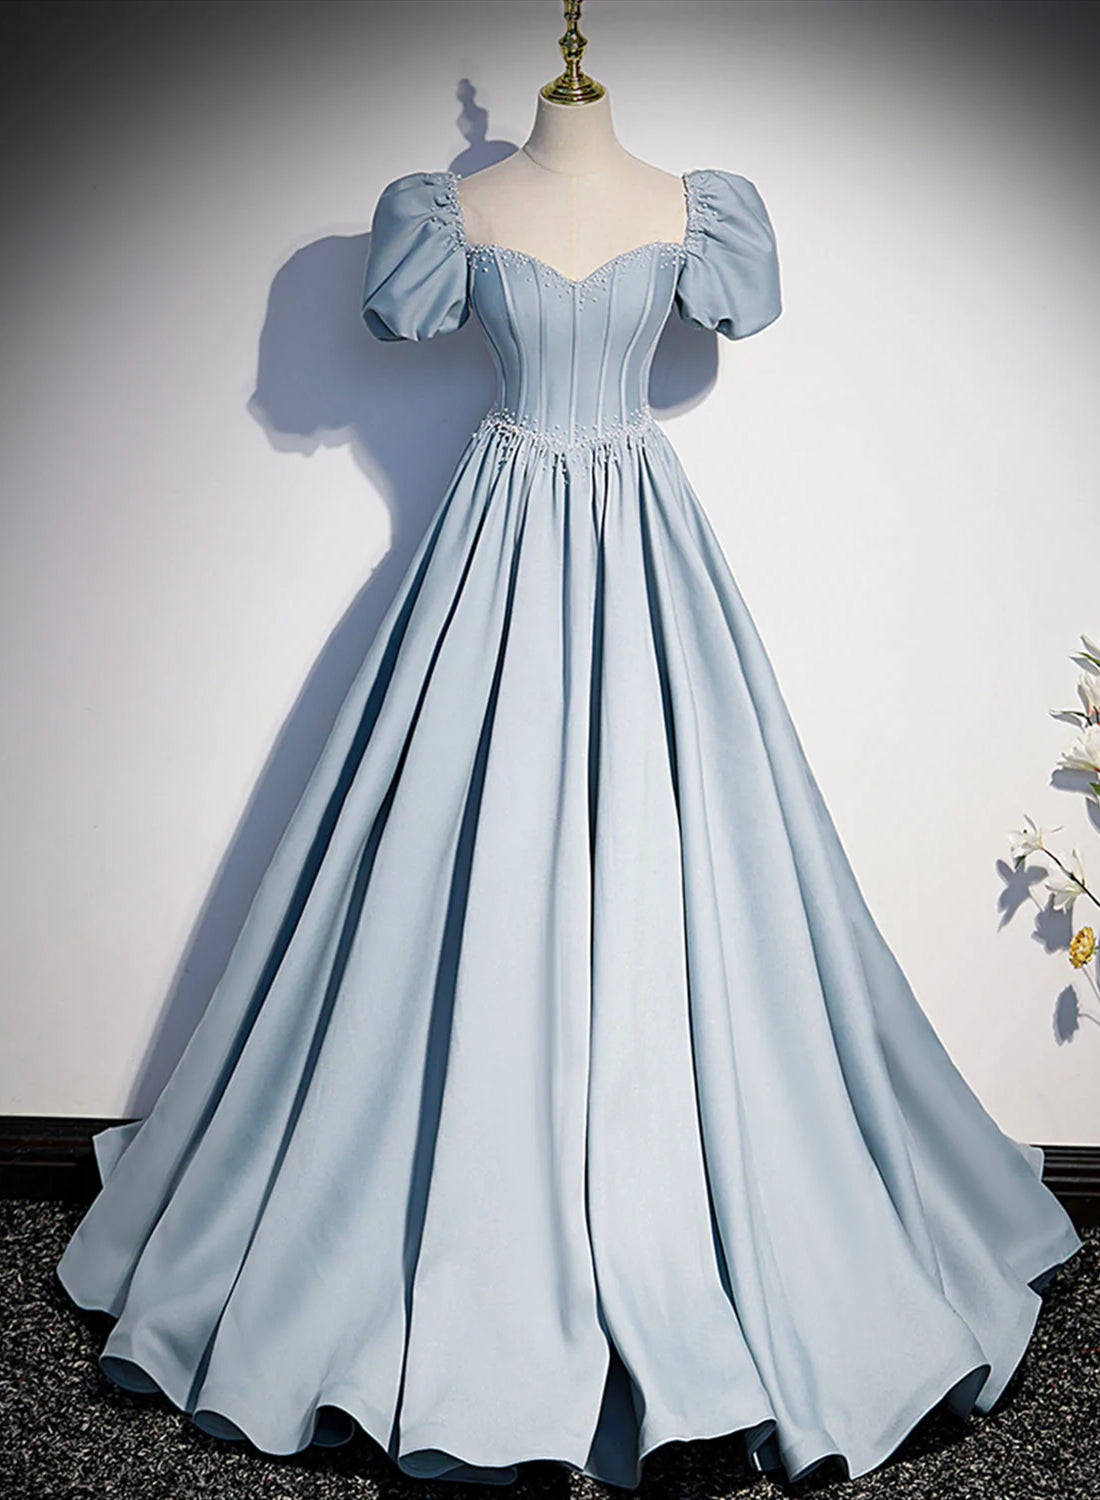 Formal Dress Outfits, Blue Satin Long Prom Dress with Pearls, Blue Short Sleeves A-line Evening Dress